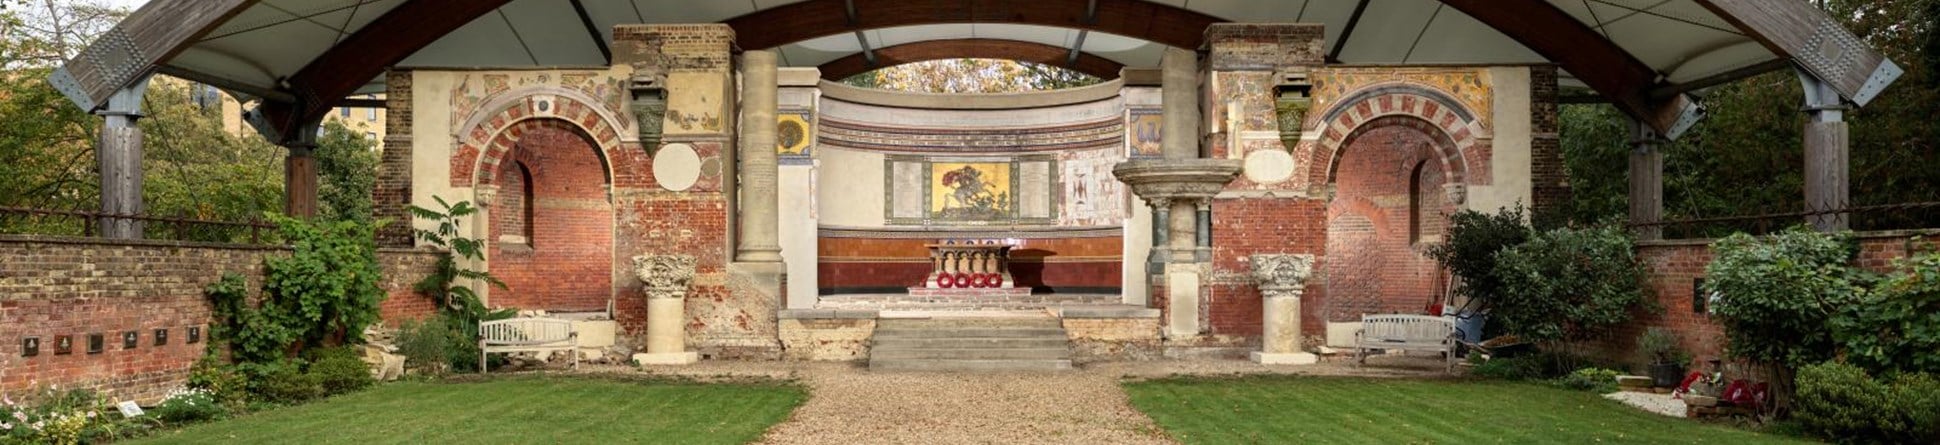 The altar, apse and end wall of a ruined church, all covered by a solid modern arched canopy